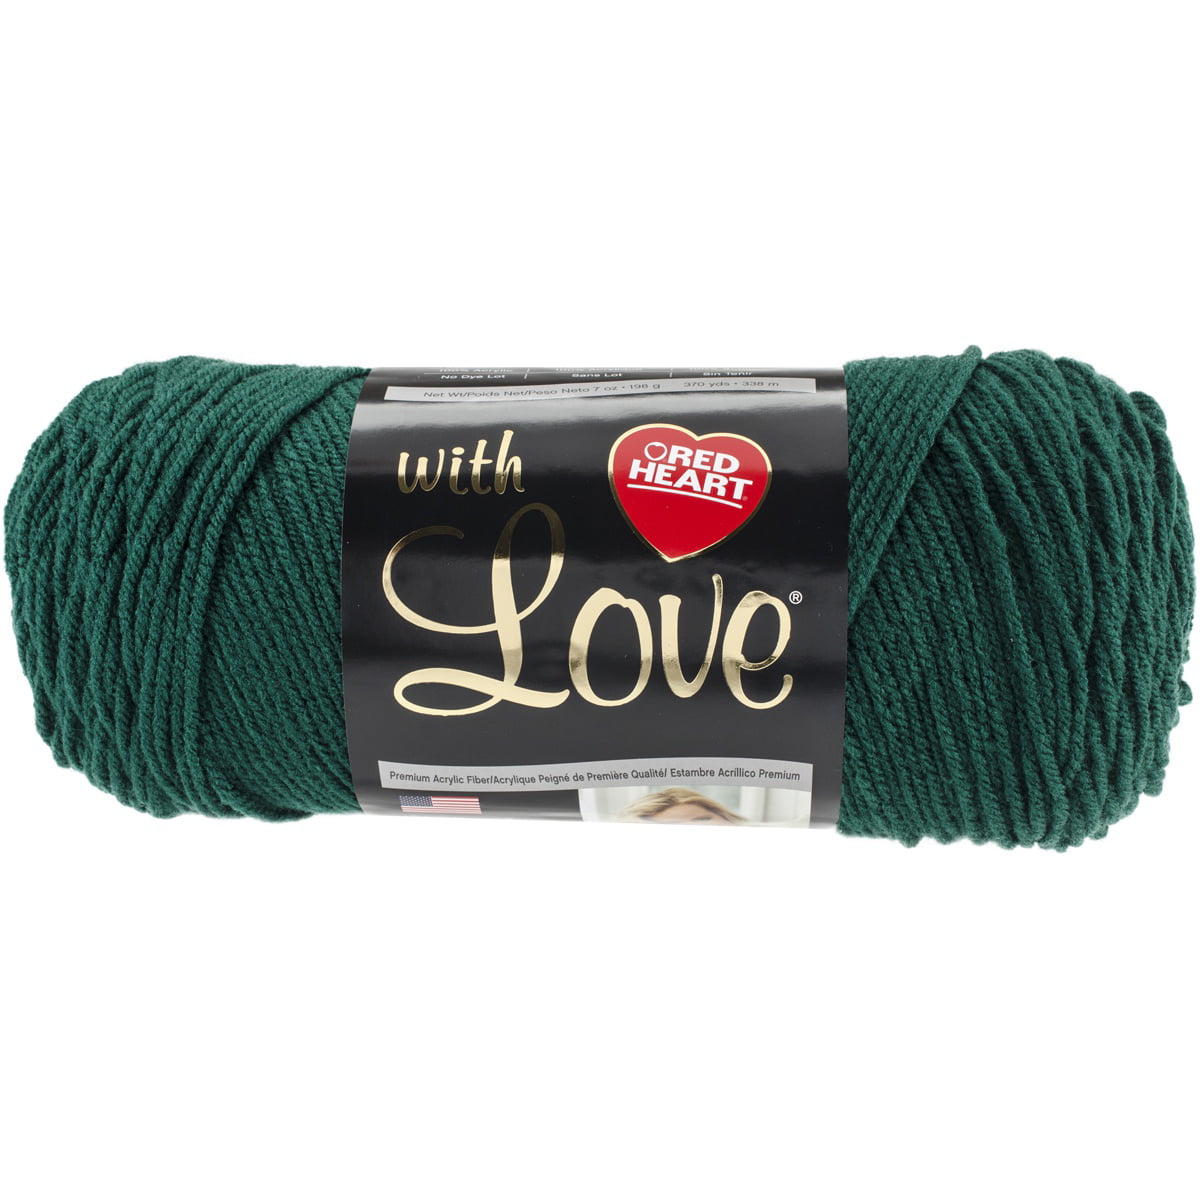 Red Heart With Love Evergreen Yarn - 3 Pack of 198g/7oz - Acrylic - 4  Medium (Worsted) - 370 Yards - Knitting/Crochet